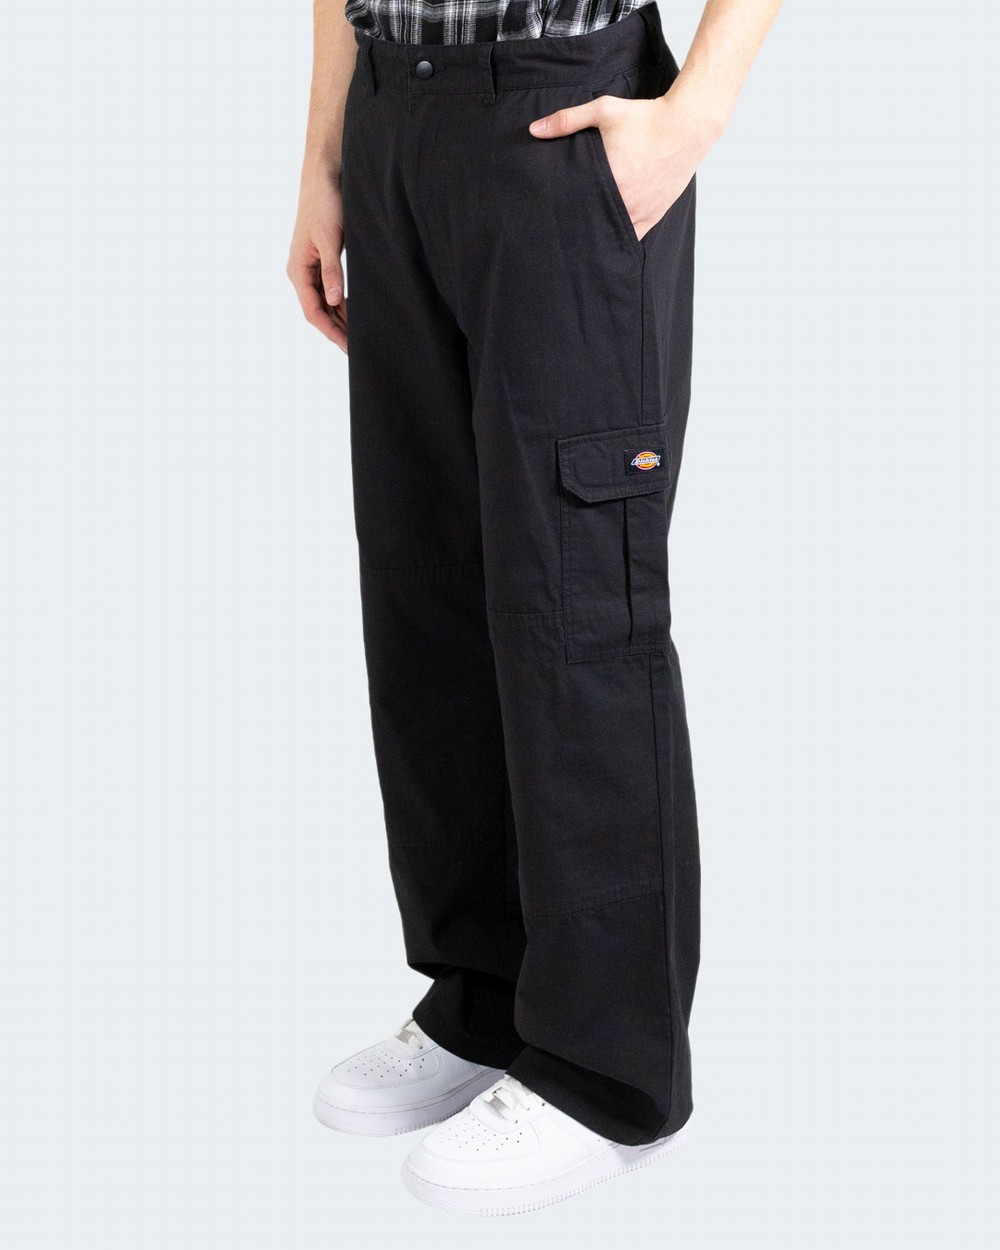 Cheyainz - Low-Rise Loose-Fit Cargo Pants | YesStyle